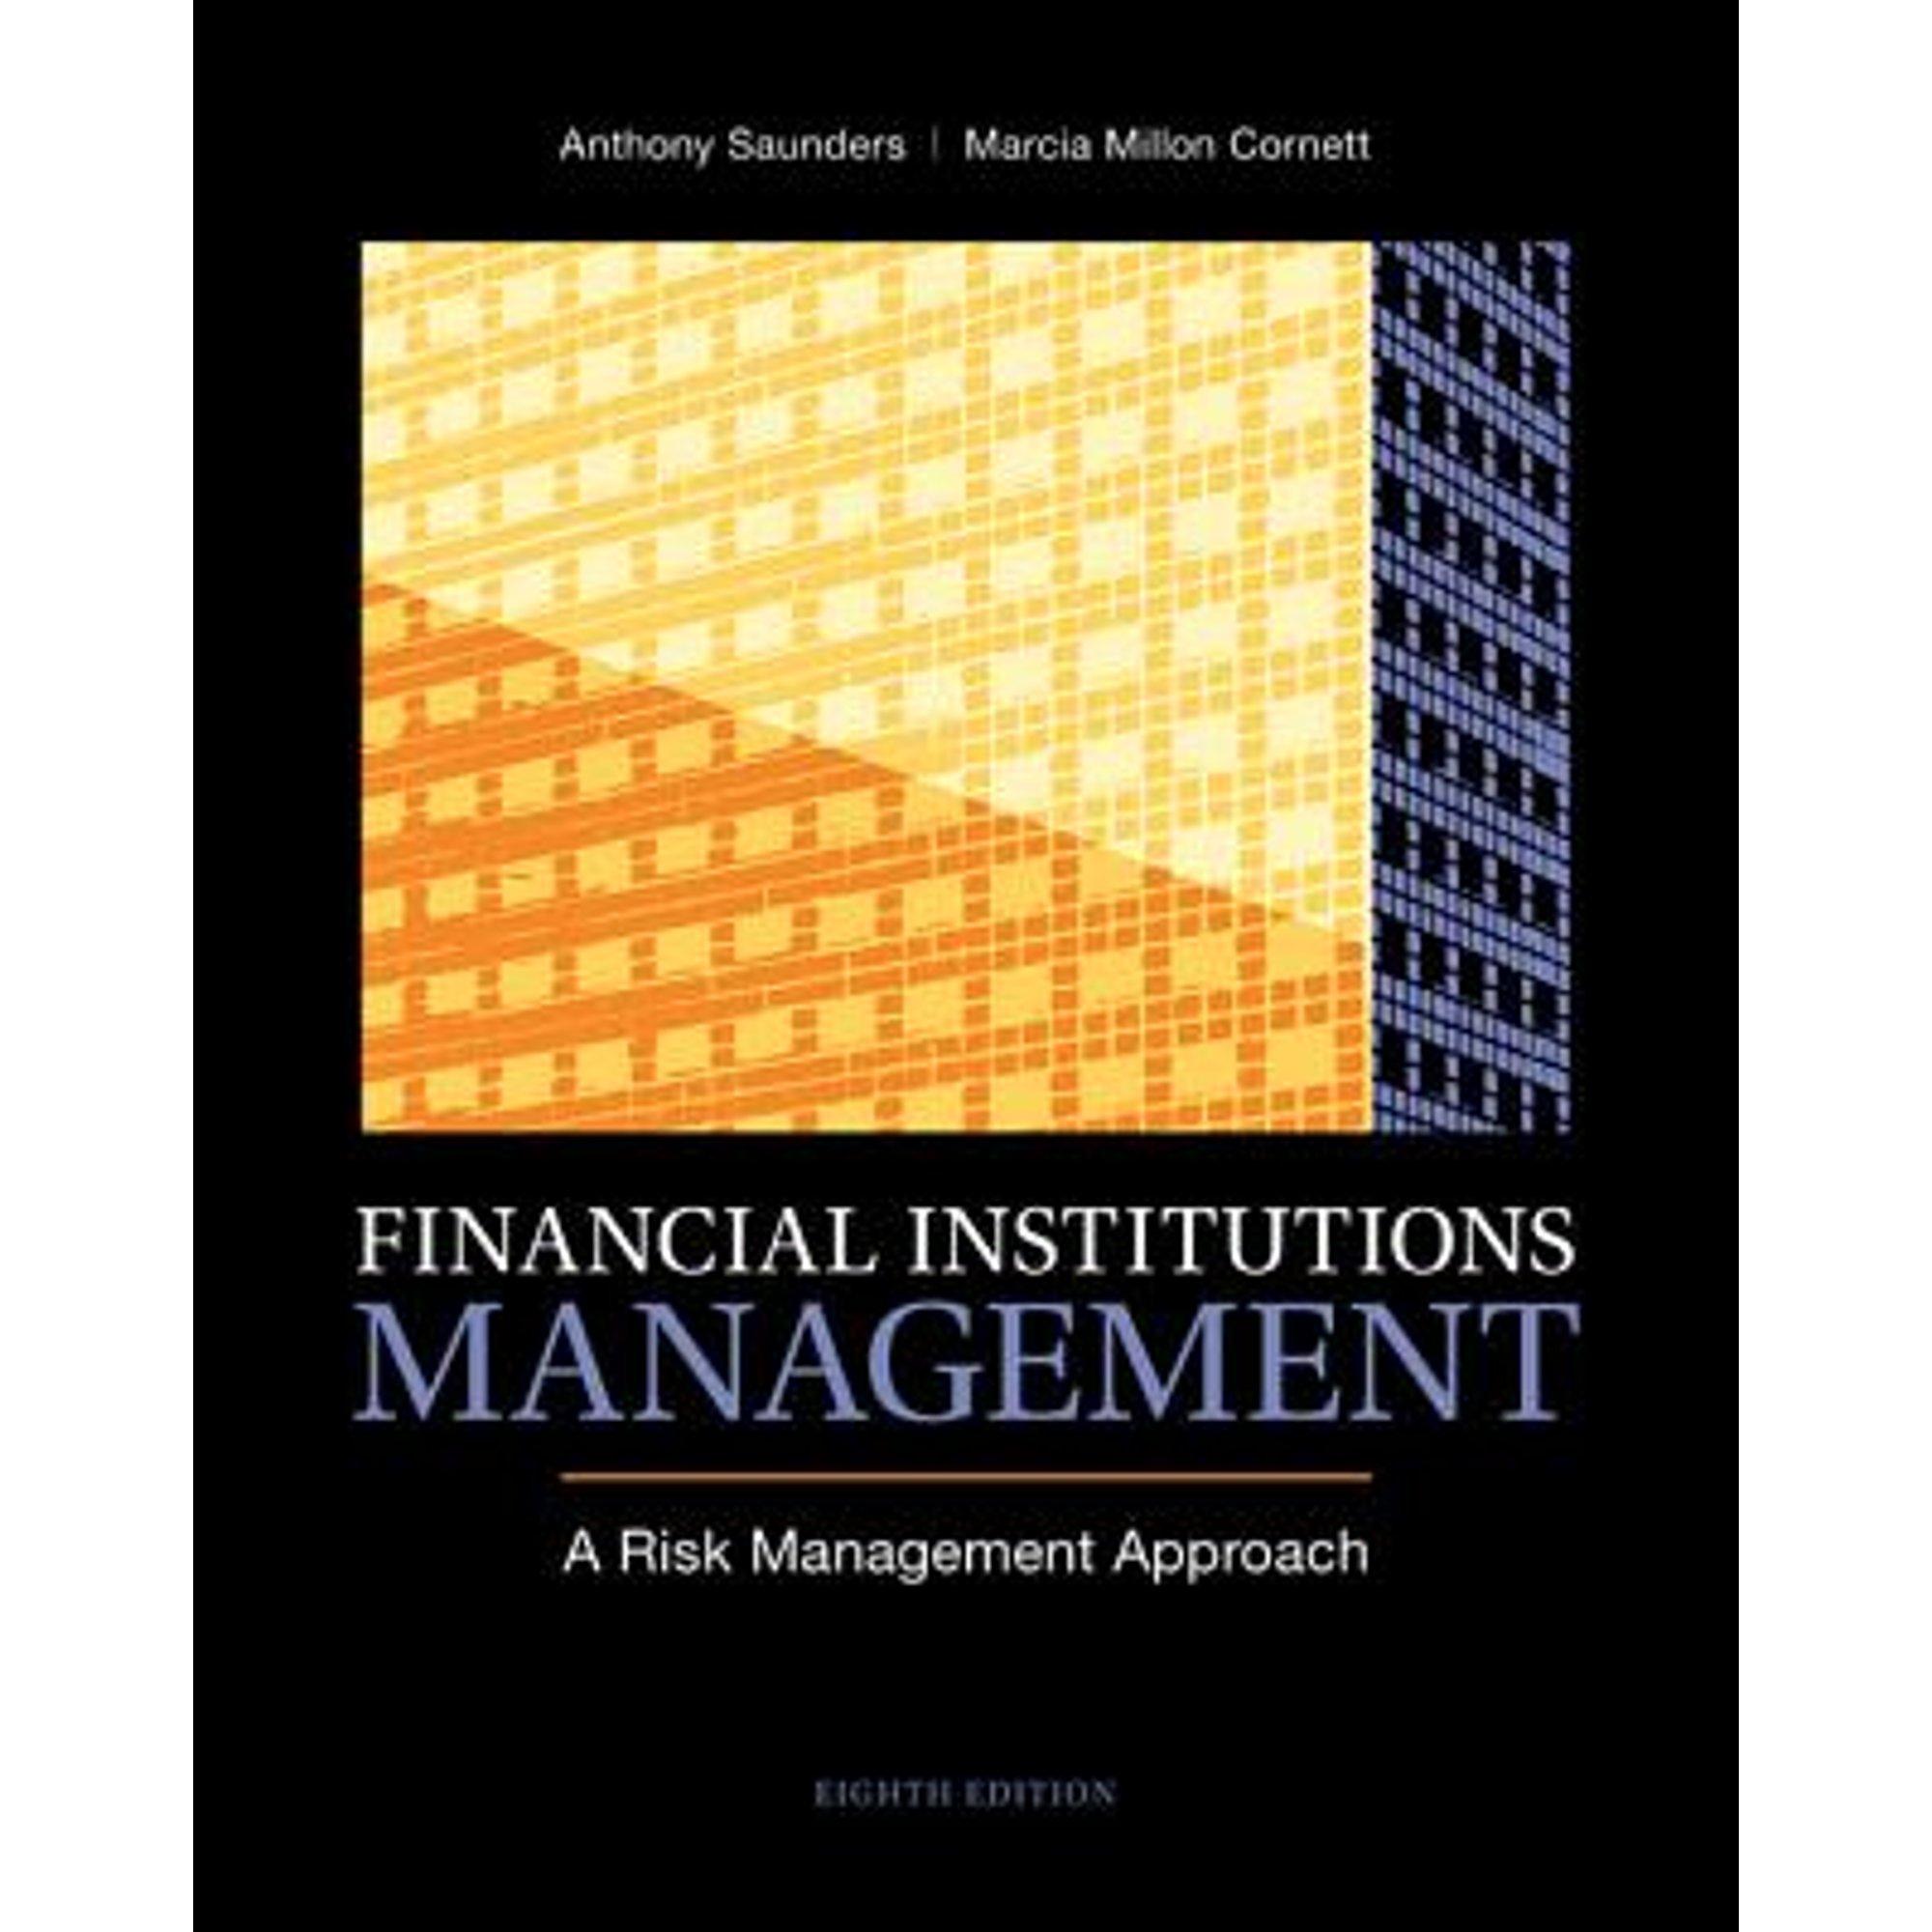 financial institutions management 8th edition anthony saunders, marcia cornett 0078034809, 978-0078034800